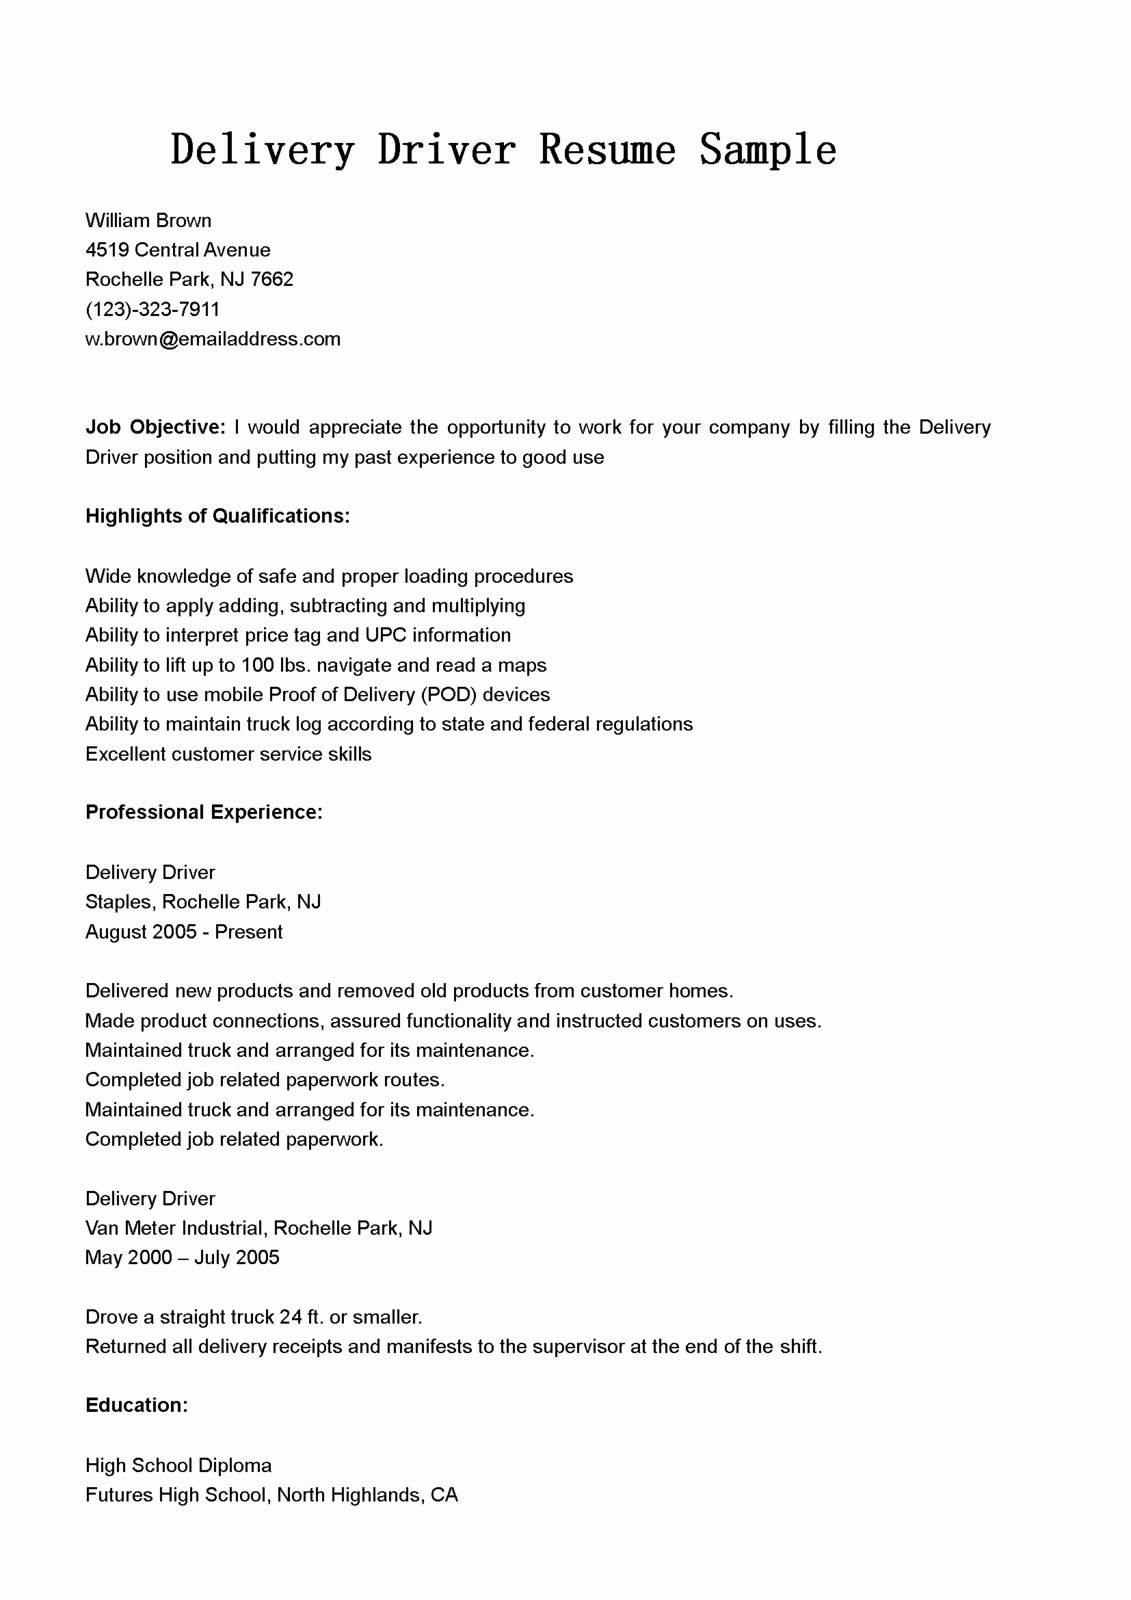 Driver Resumes Delivery Driver Resume Sample